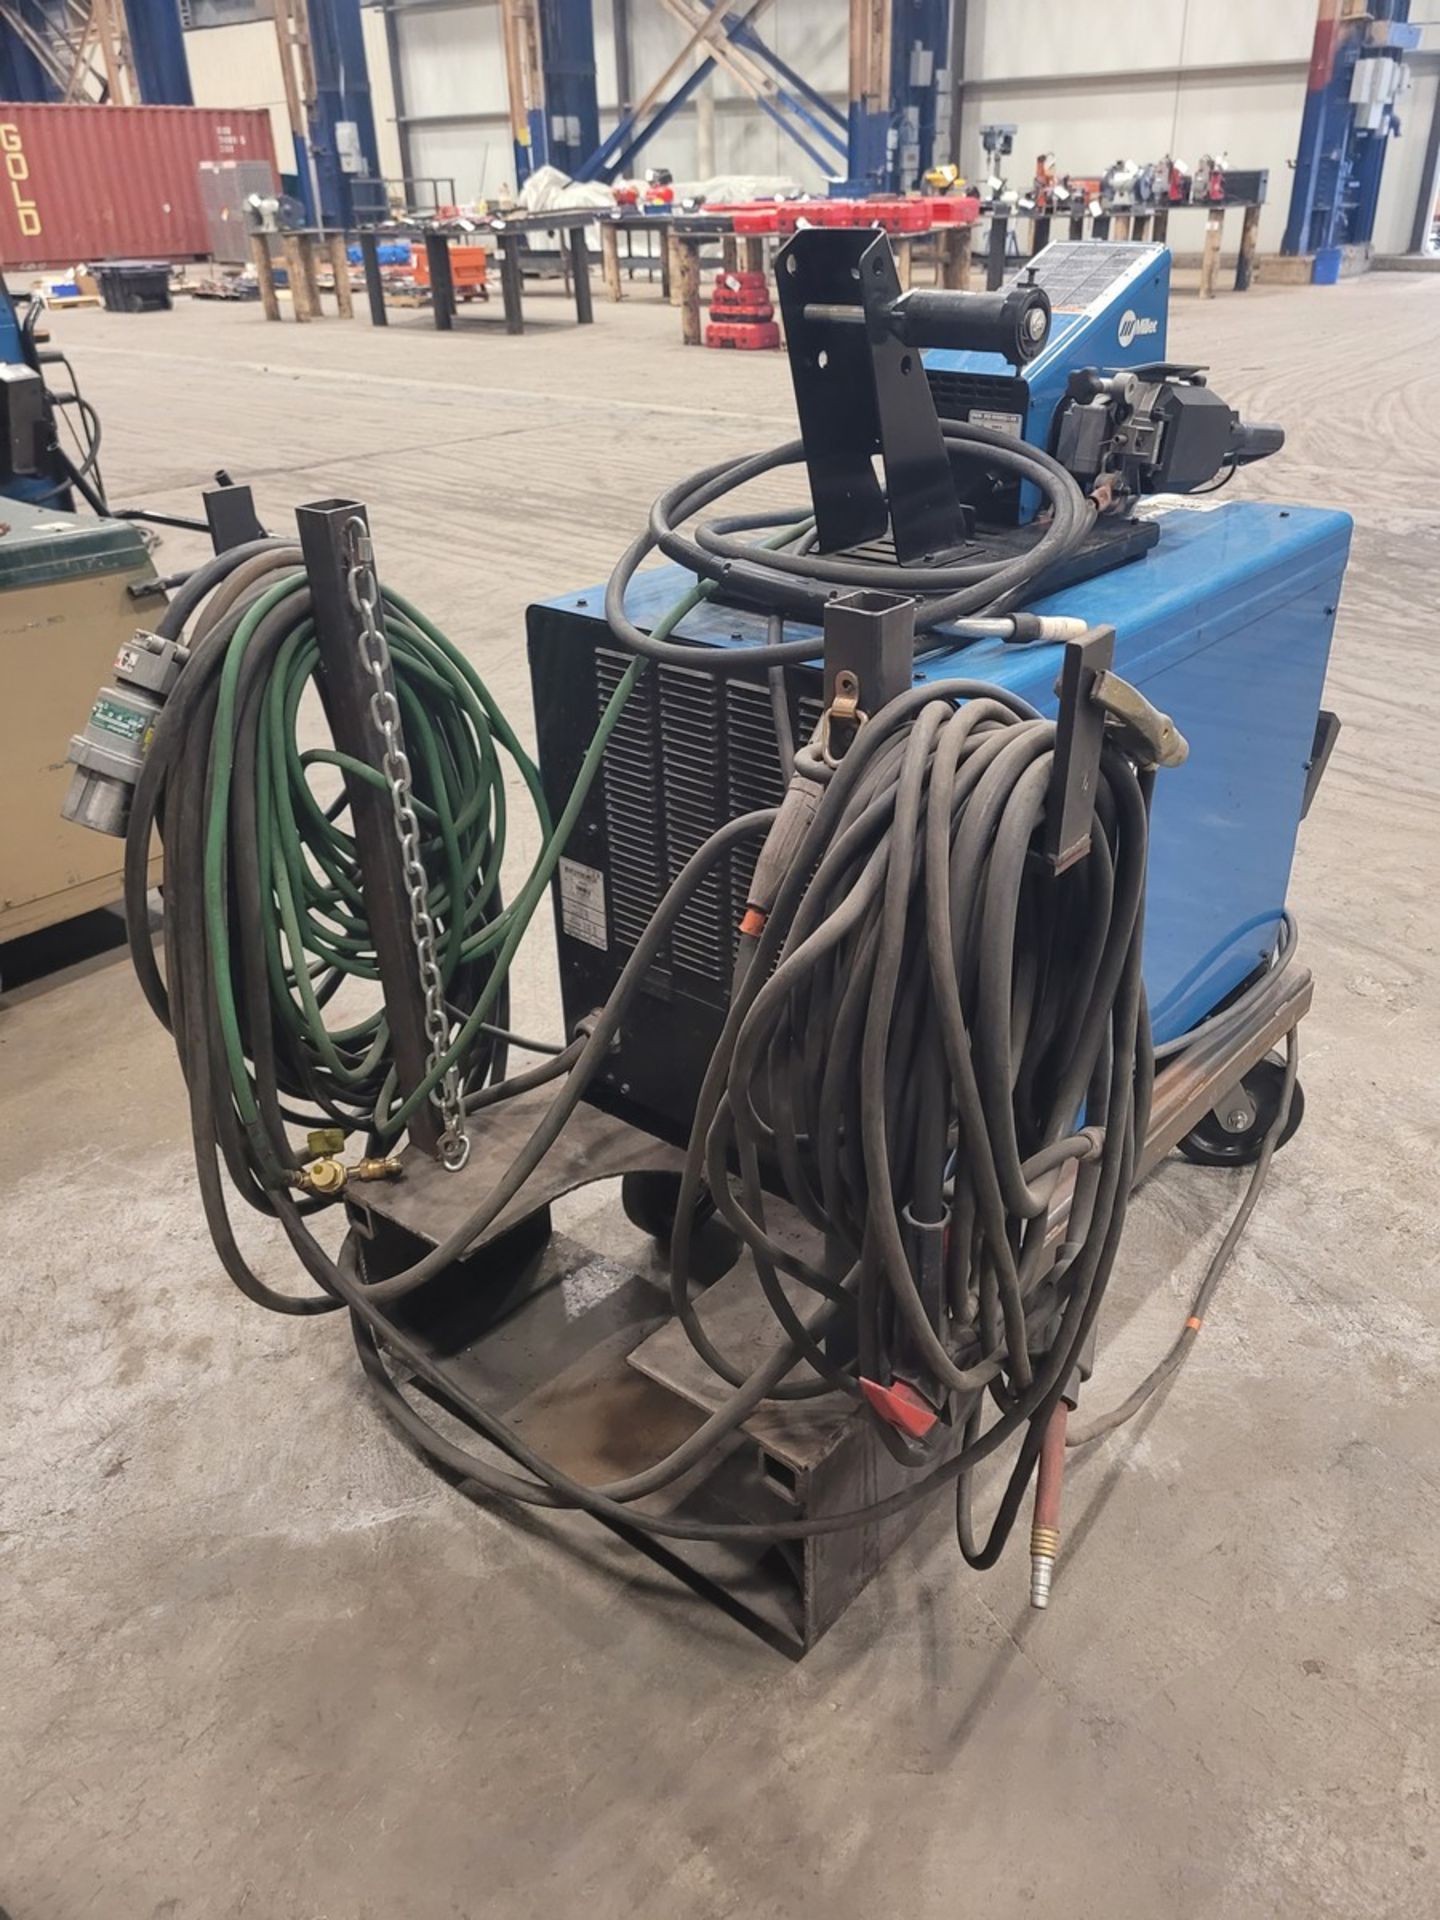 Miller Electric Dimension 652 CC/CV DC Welding Power Source - Image 4 of 7